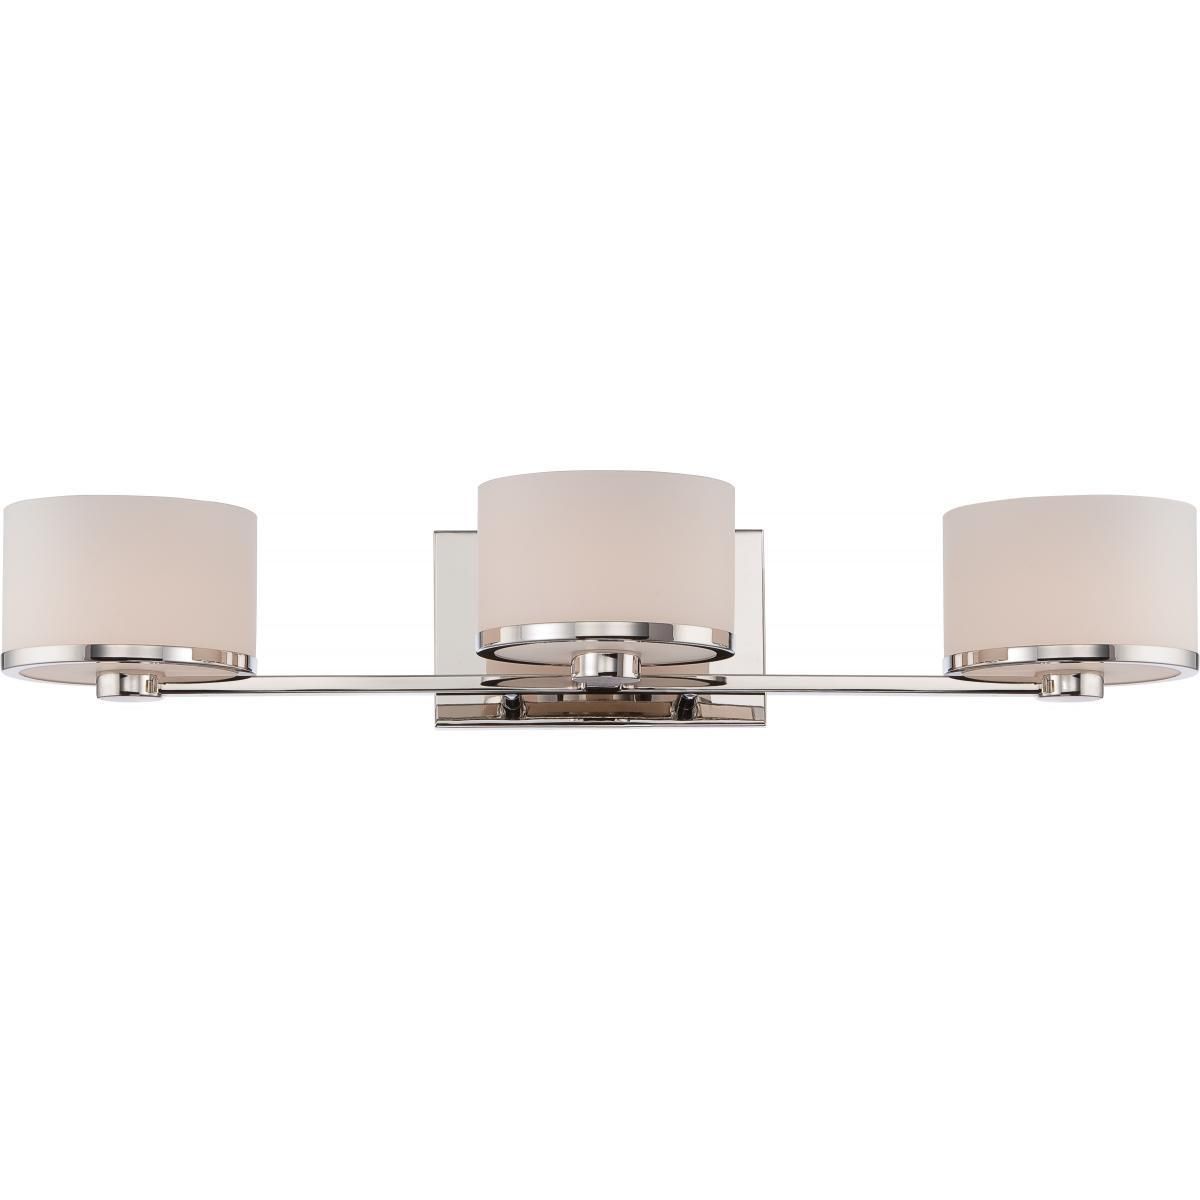 Celine 3 Light Vanity Fixture With Etched Opal Glass | Bathroom Vanity In Gaunts Earthcott Wall Mirrors (View 10 of 15)